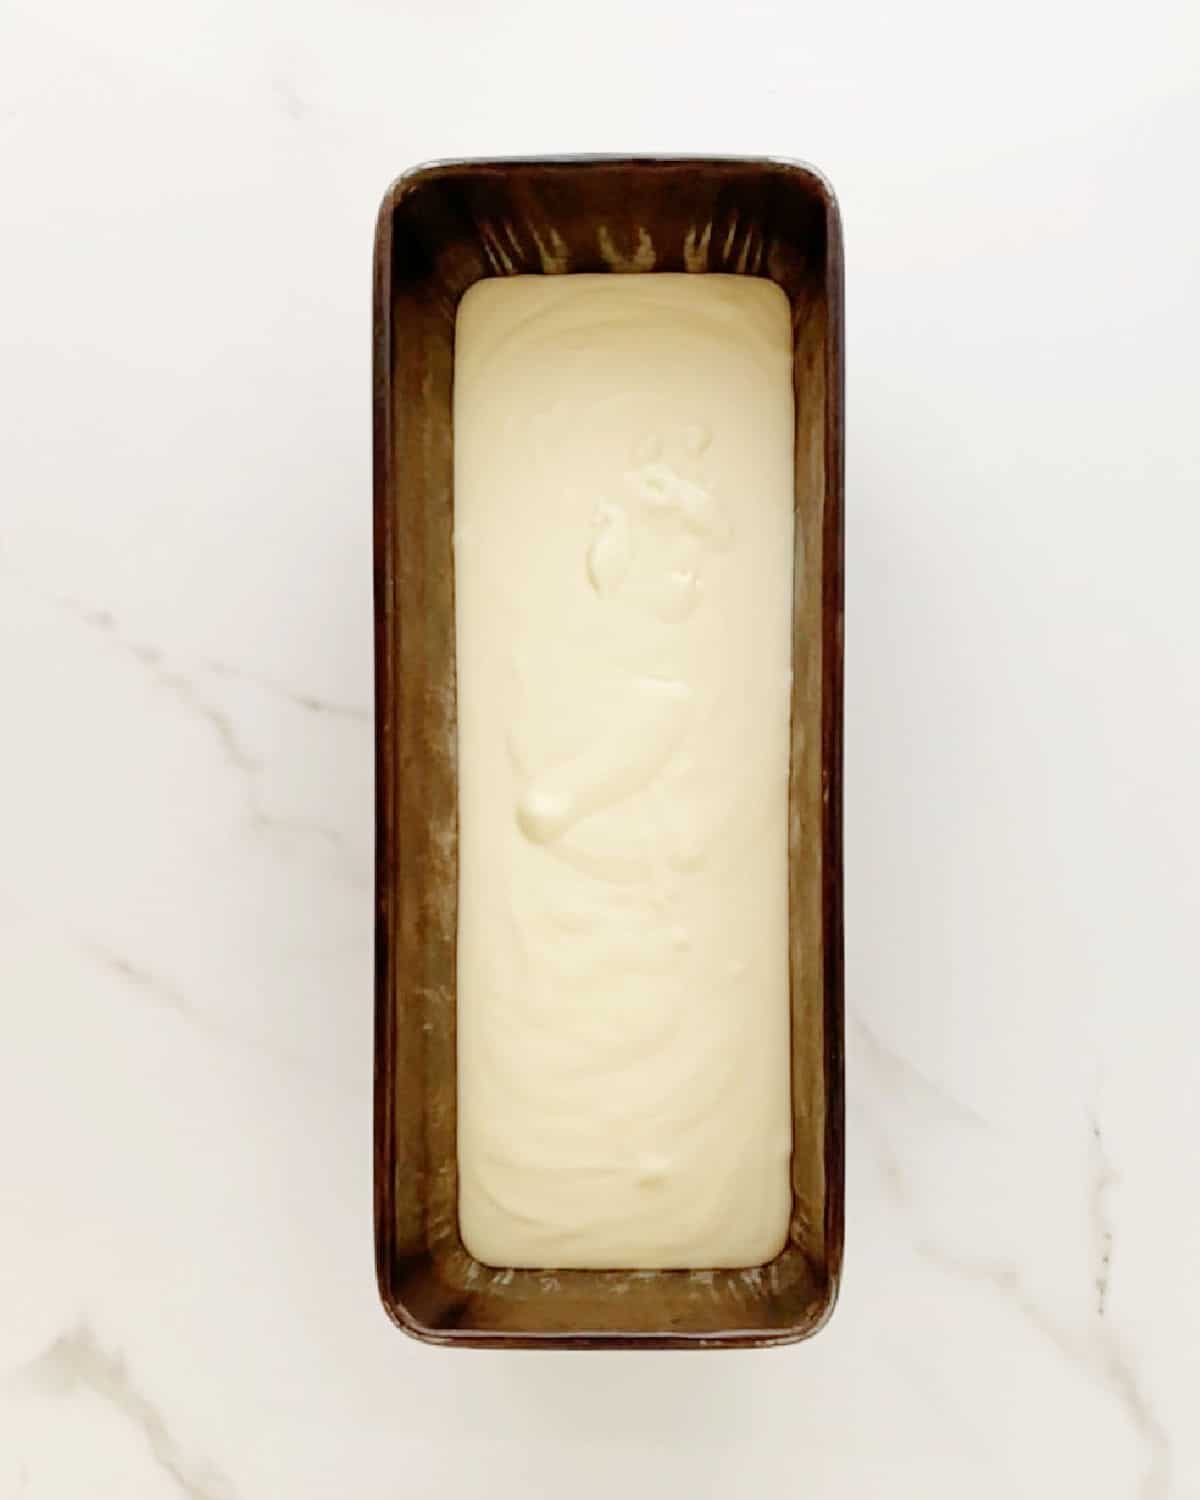 Dark loaf pan with ice crema mixture on a white marbled surface.